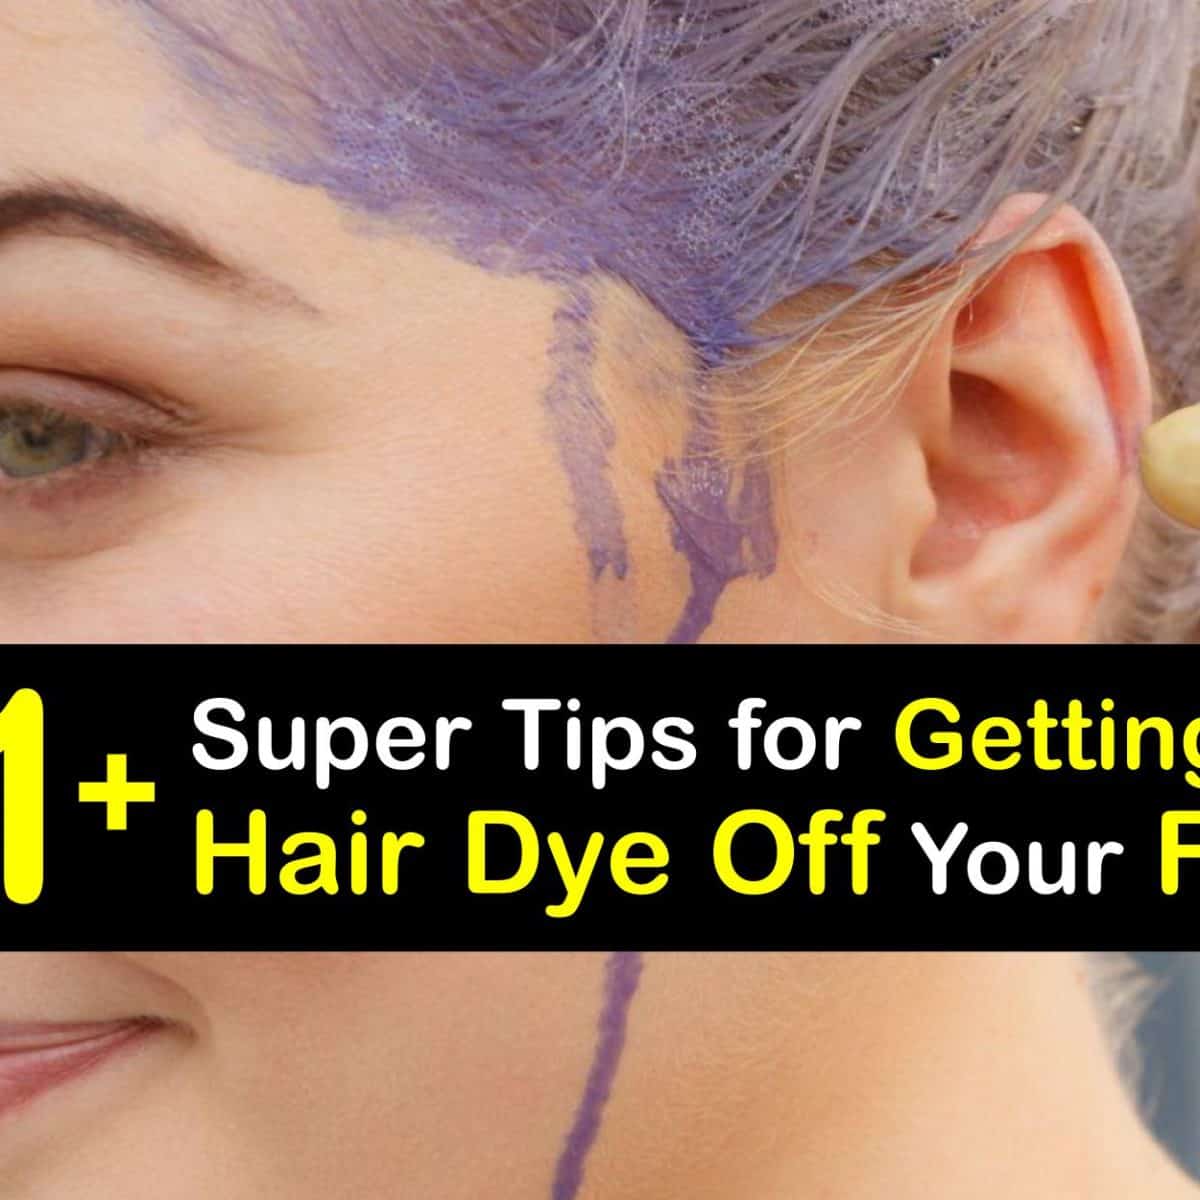 Face Cleaning - Easy Ways to Get Hair Dye Off Your Forehead